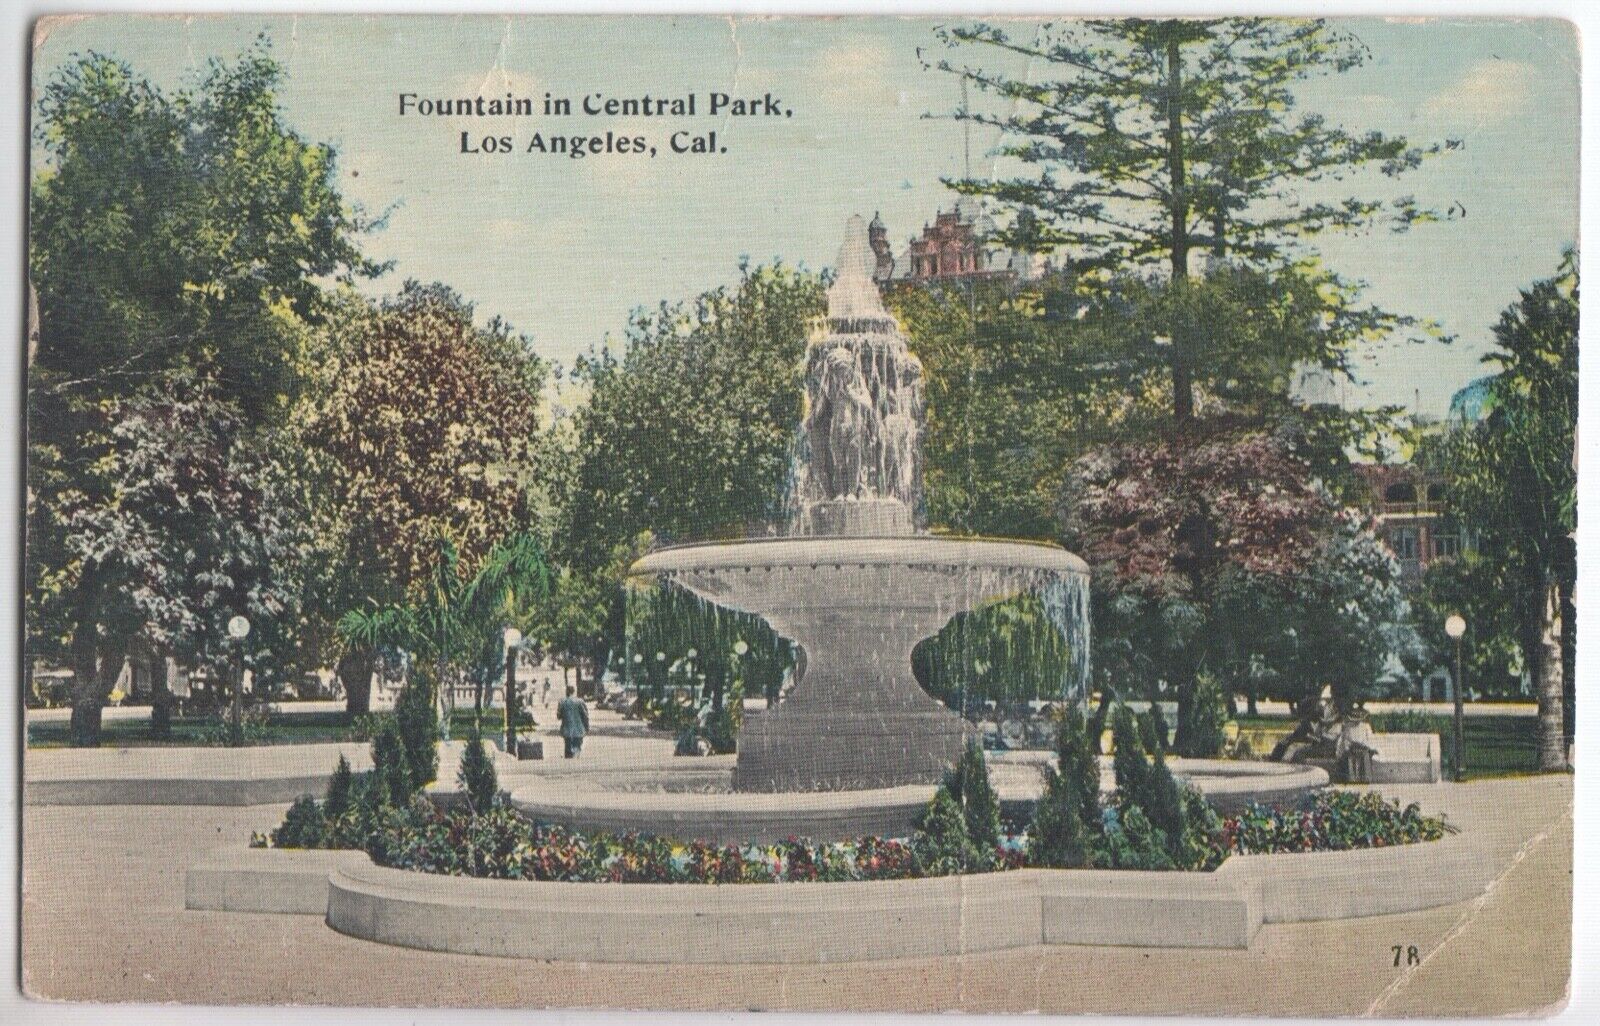 1914 Fountain in Central Park - Los Angeles - World Panama Pacific Expo 1915 PM 